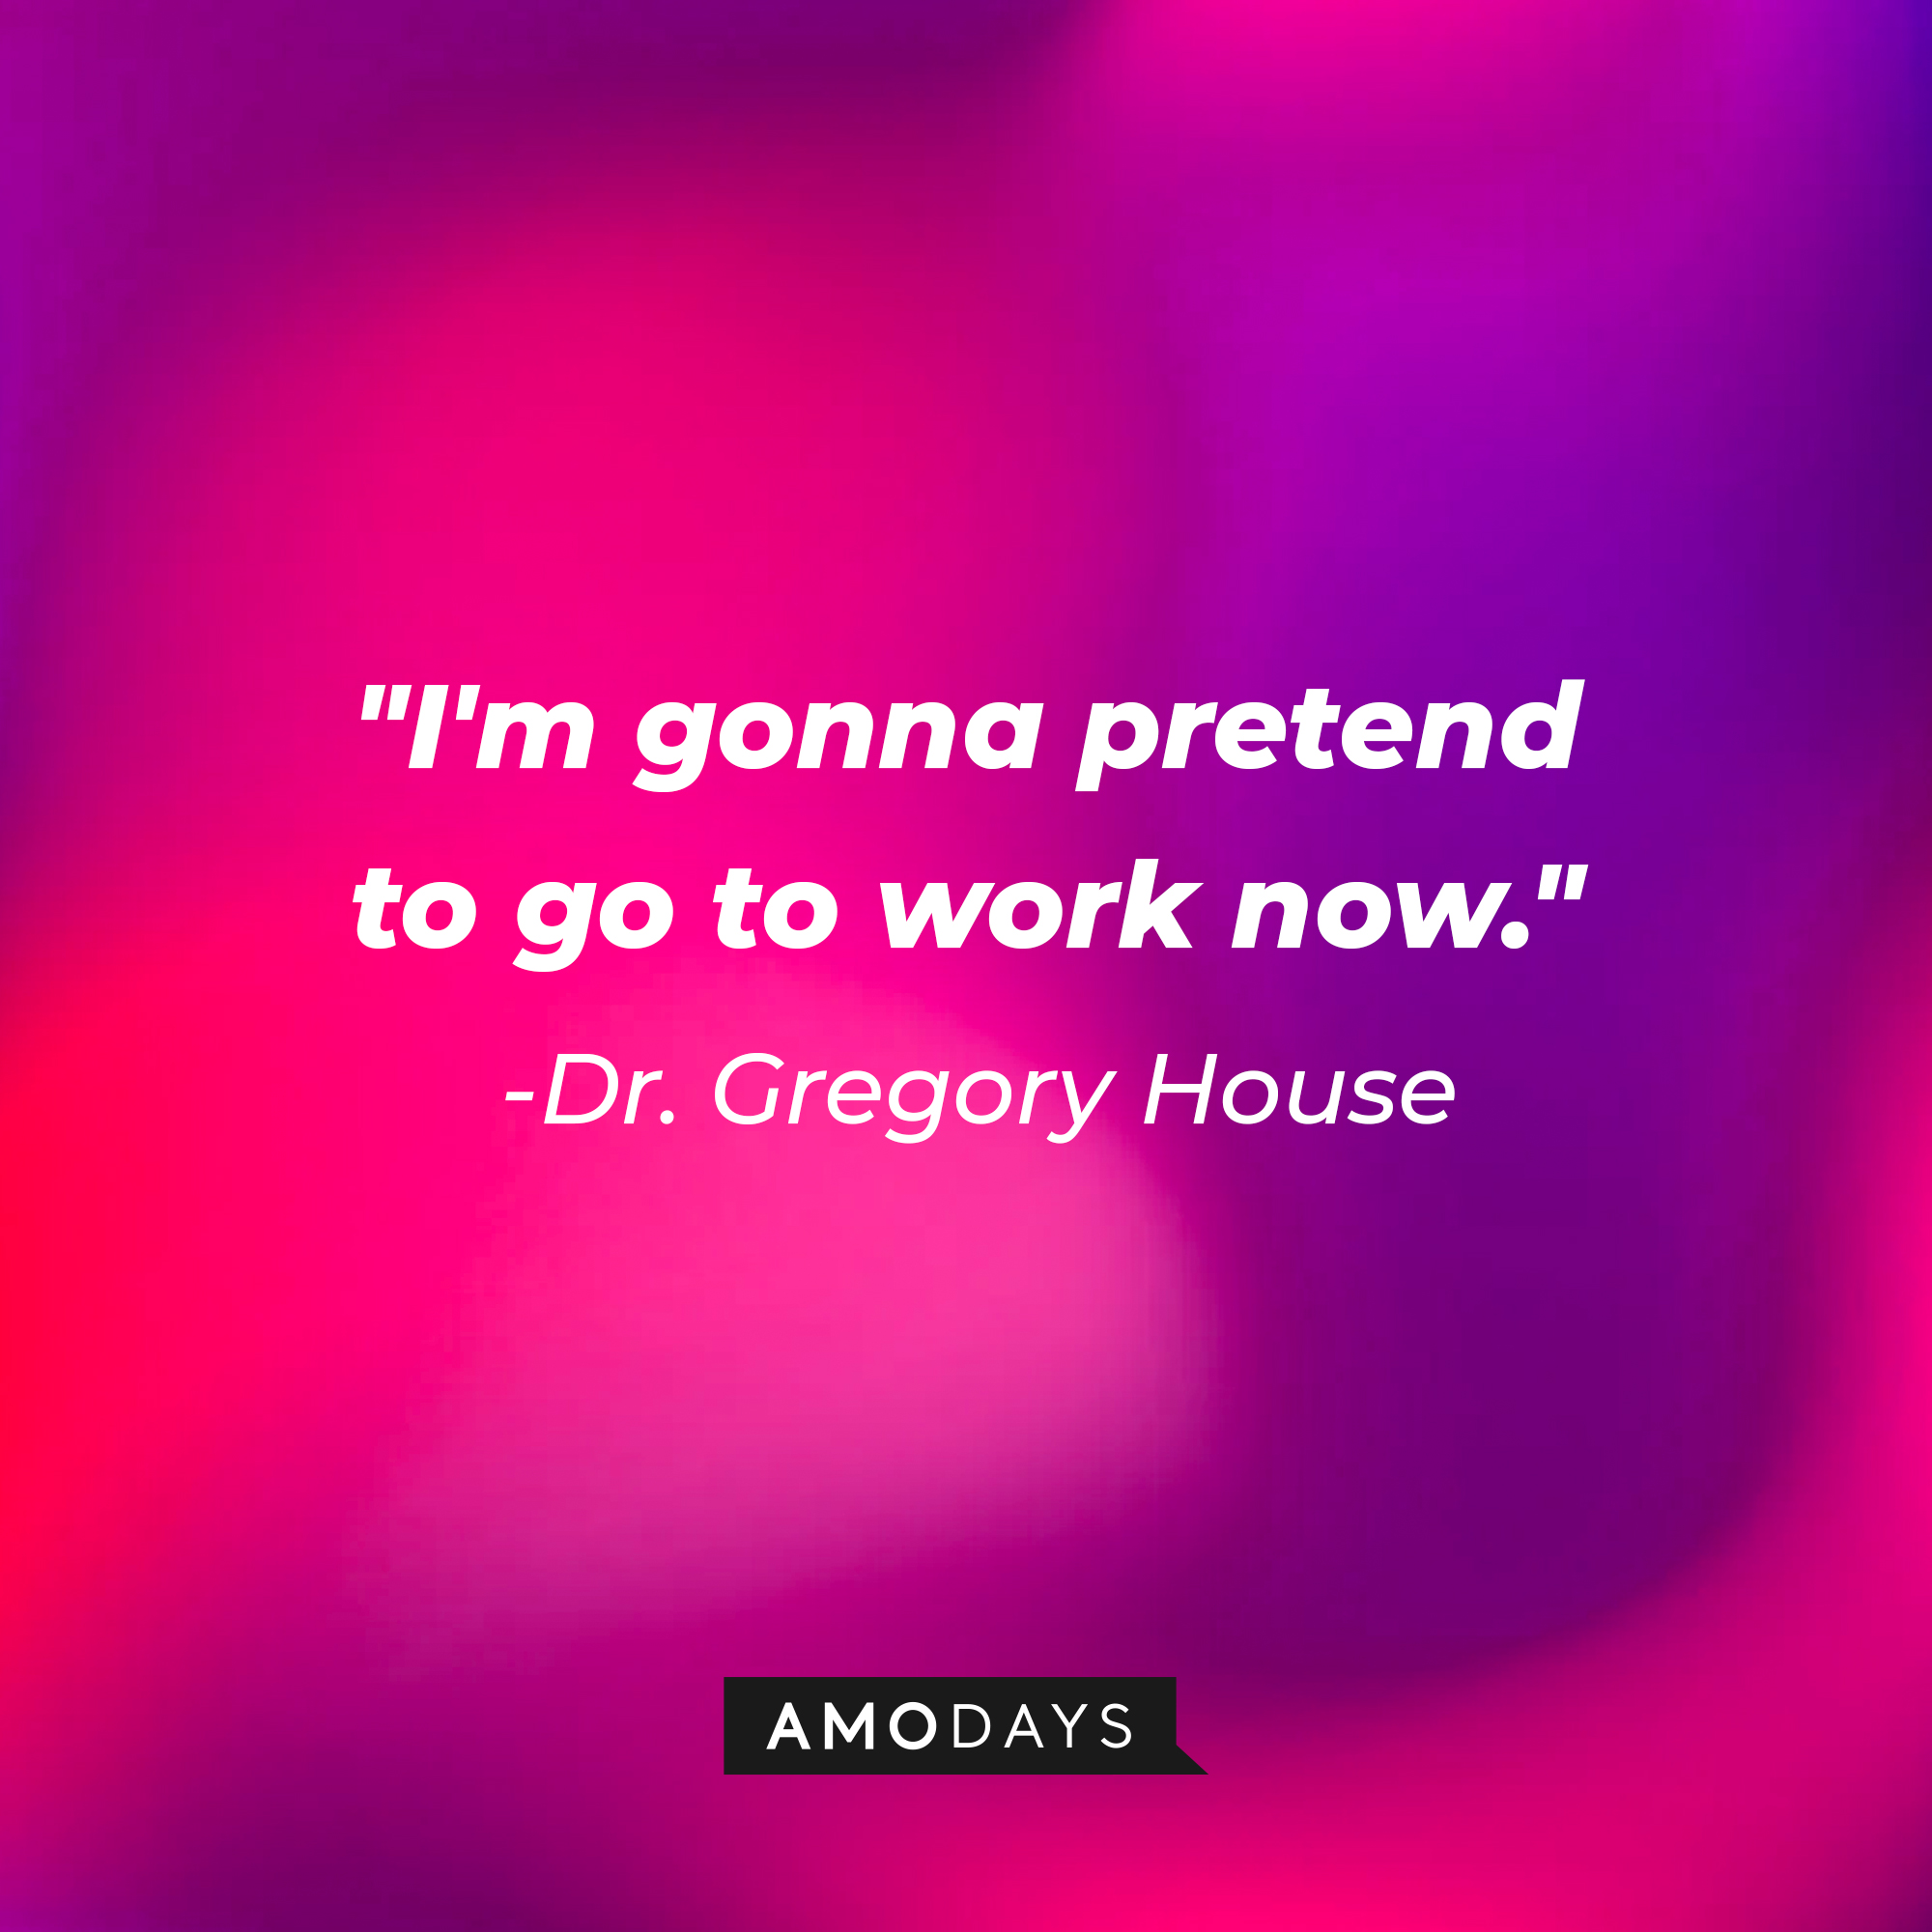 Dr. Gregory House’s quote: "I'm gonna pretend to go to work now." | Source: AmoDays